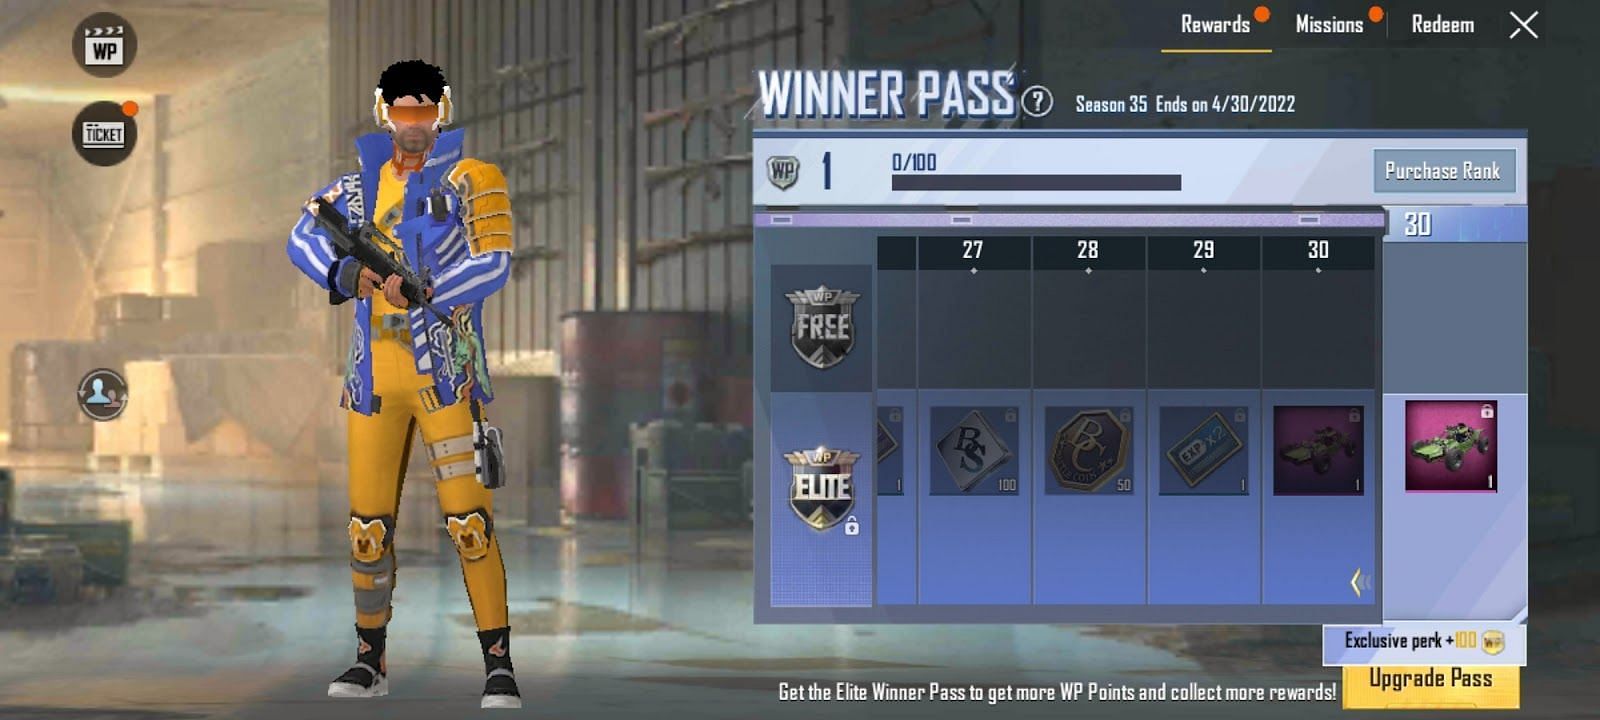 There are 30 tiers in the Winner Pass (Image via Garena)